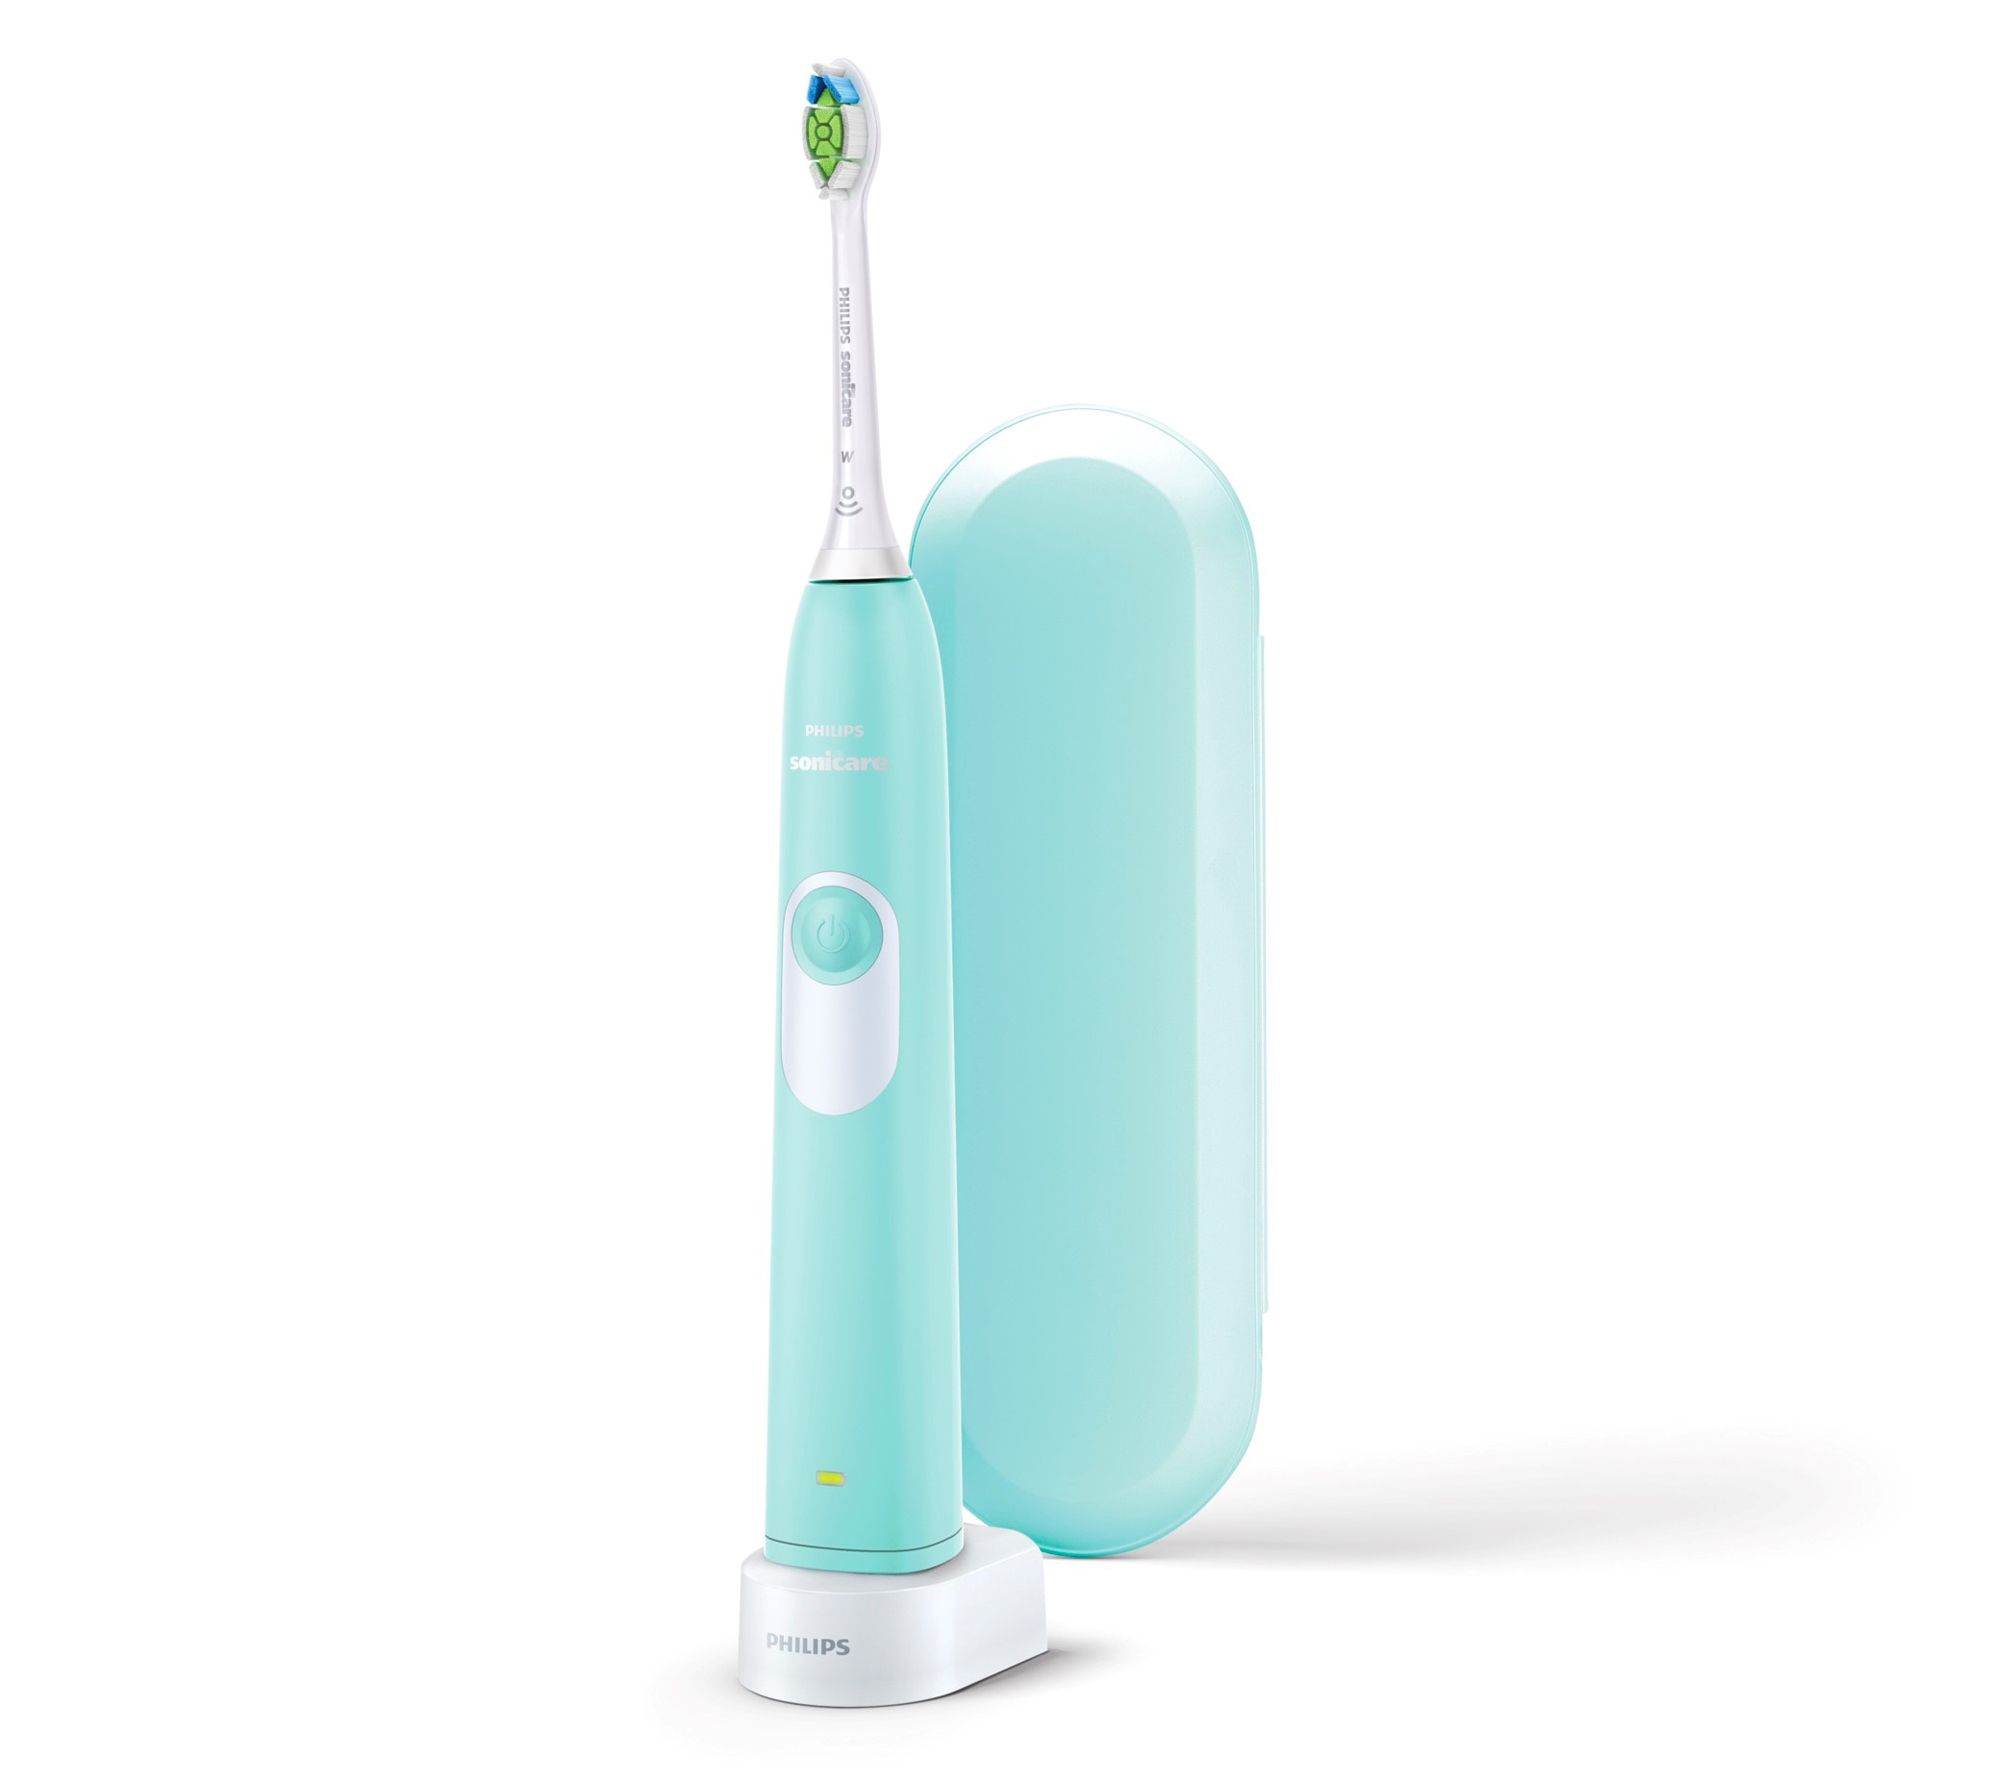 Ride Vague To construct Philips Sonicare EssentialClean Toothbrush with $20 Rebate - QVC.com